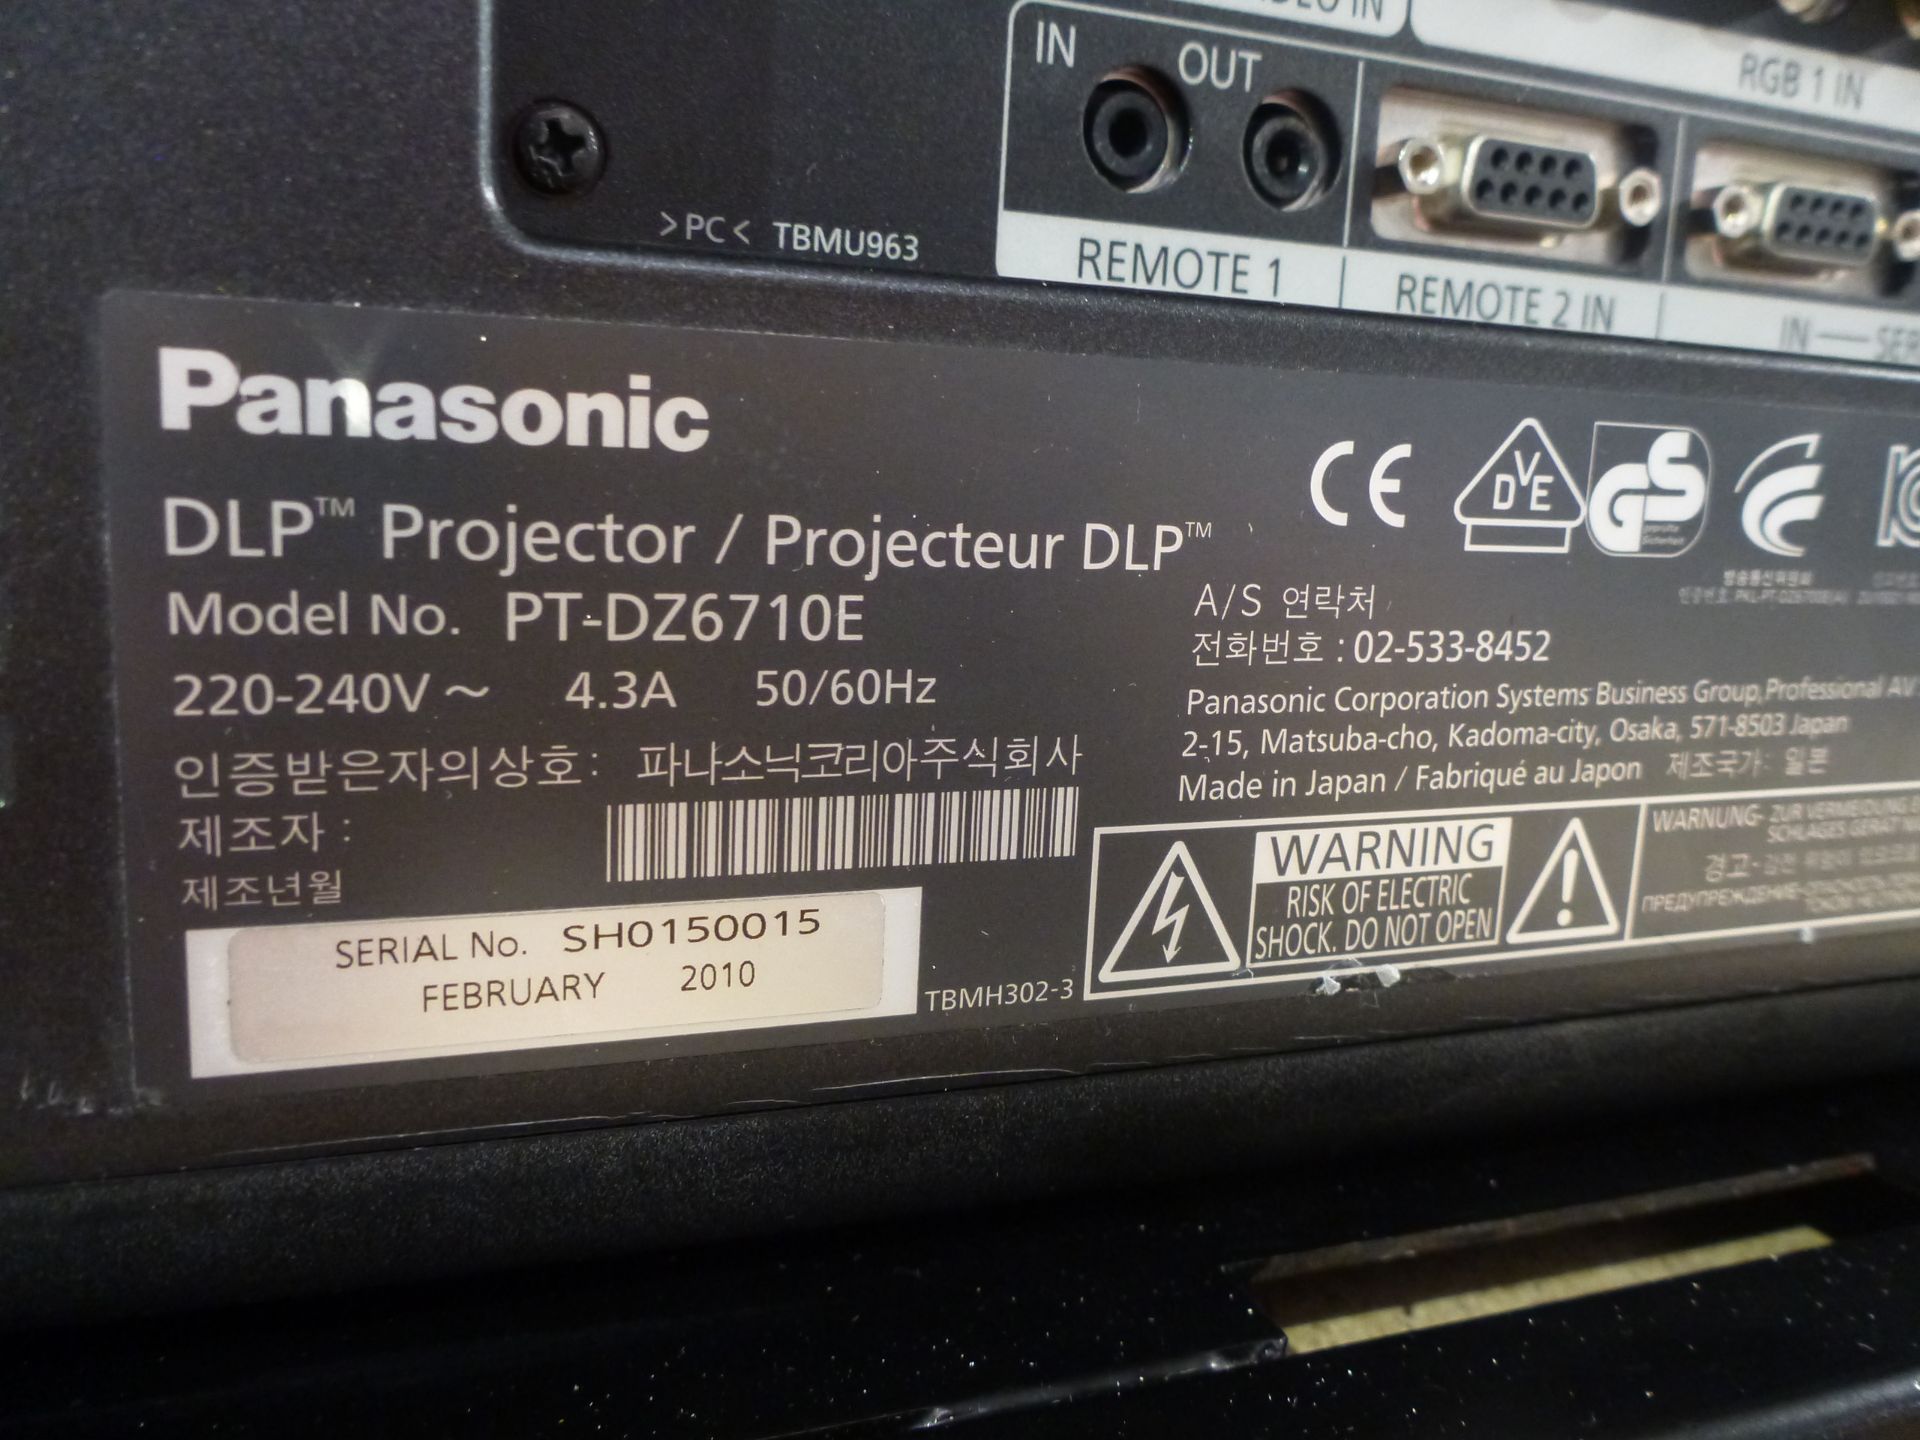 Panasonic Projector, Model PT-DZ6710E, S/N SH0150015, YOM 2010, In flight case with standard 1.3-1. - Image 6 of 13